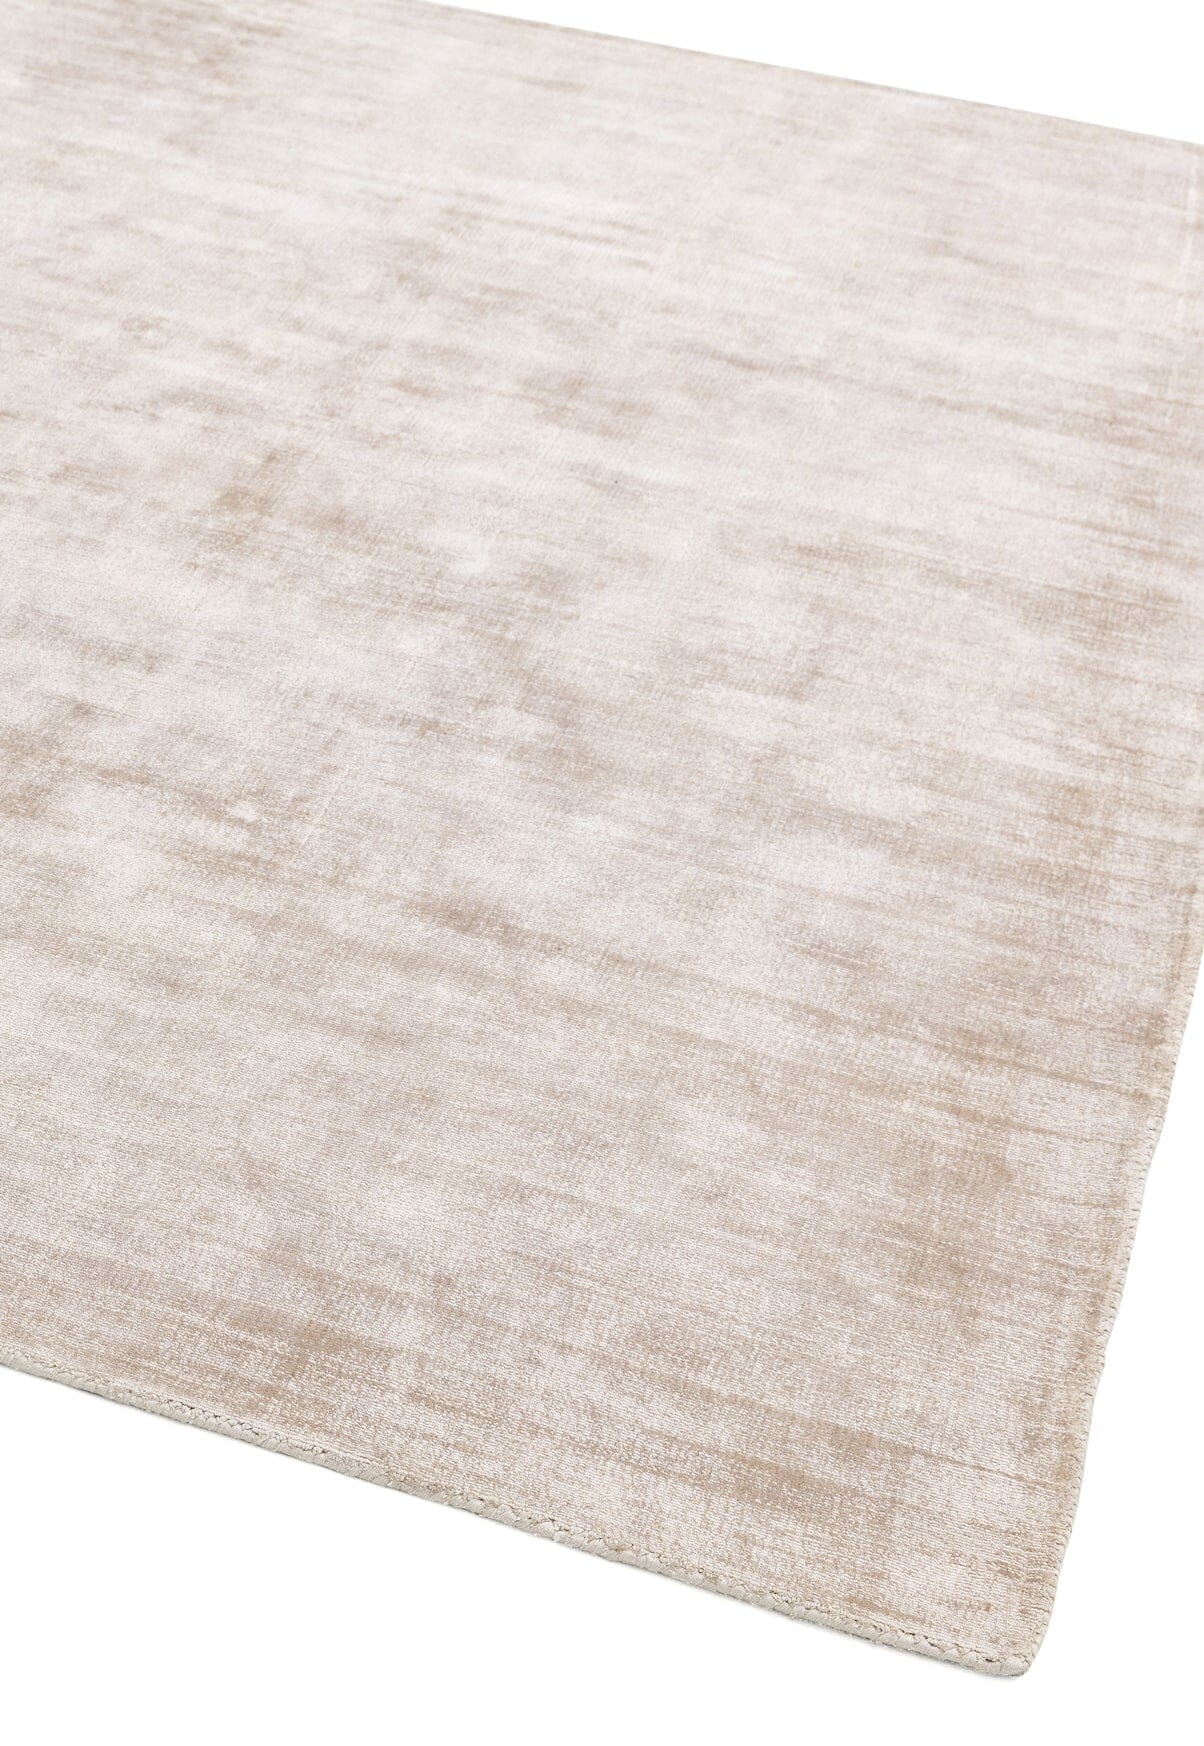  Asiatic Carpets-Asiatic Carpets Blade Hand Woven Rug Putty - 160 x 230cm-Beige, Natural 021 